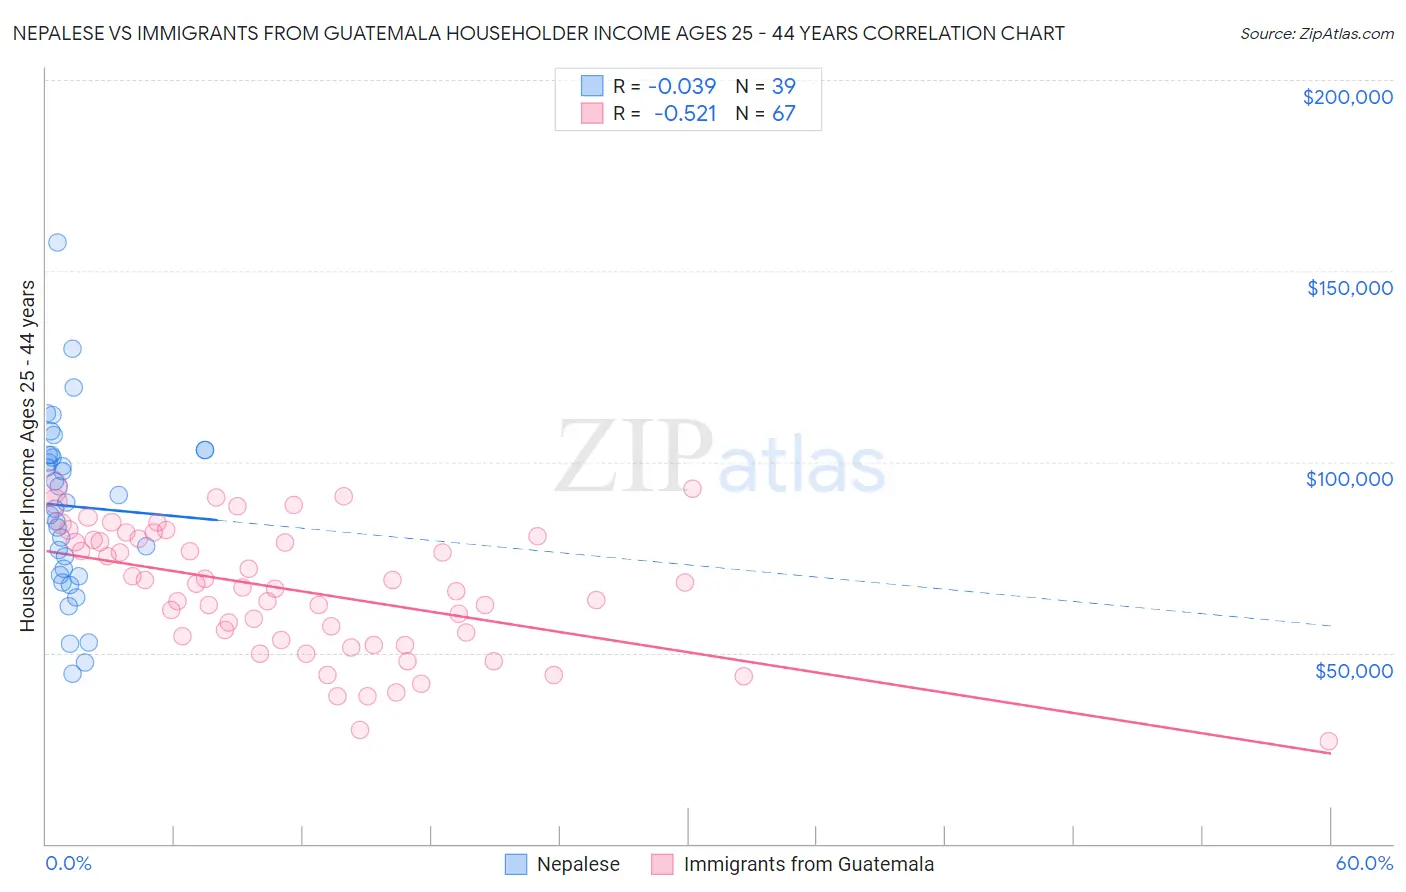 Nepalese vs Immigrants from Guatemala Householder Income Ages 25 - 44 years